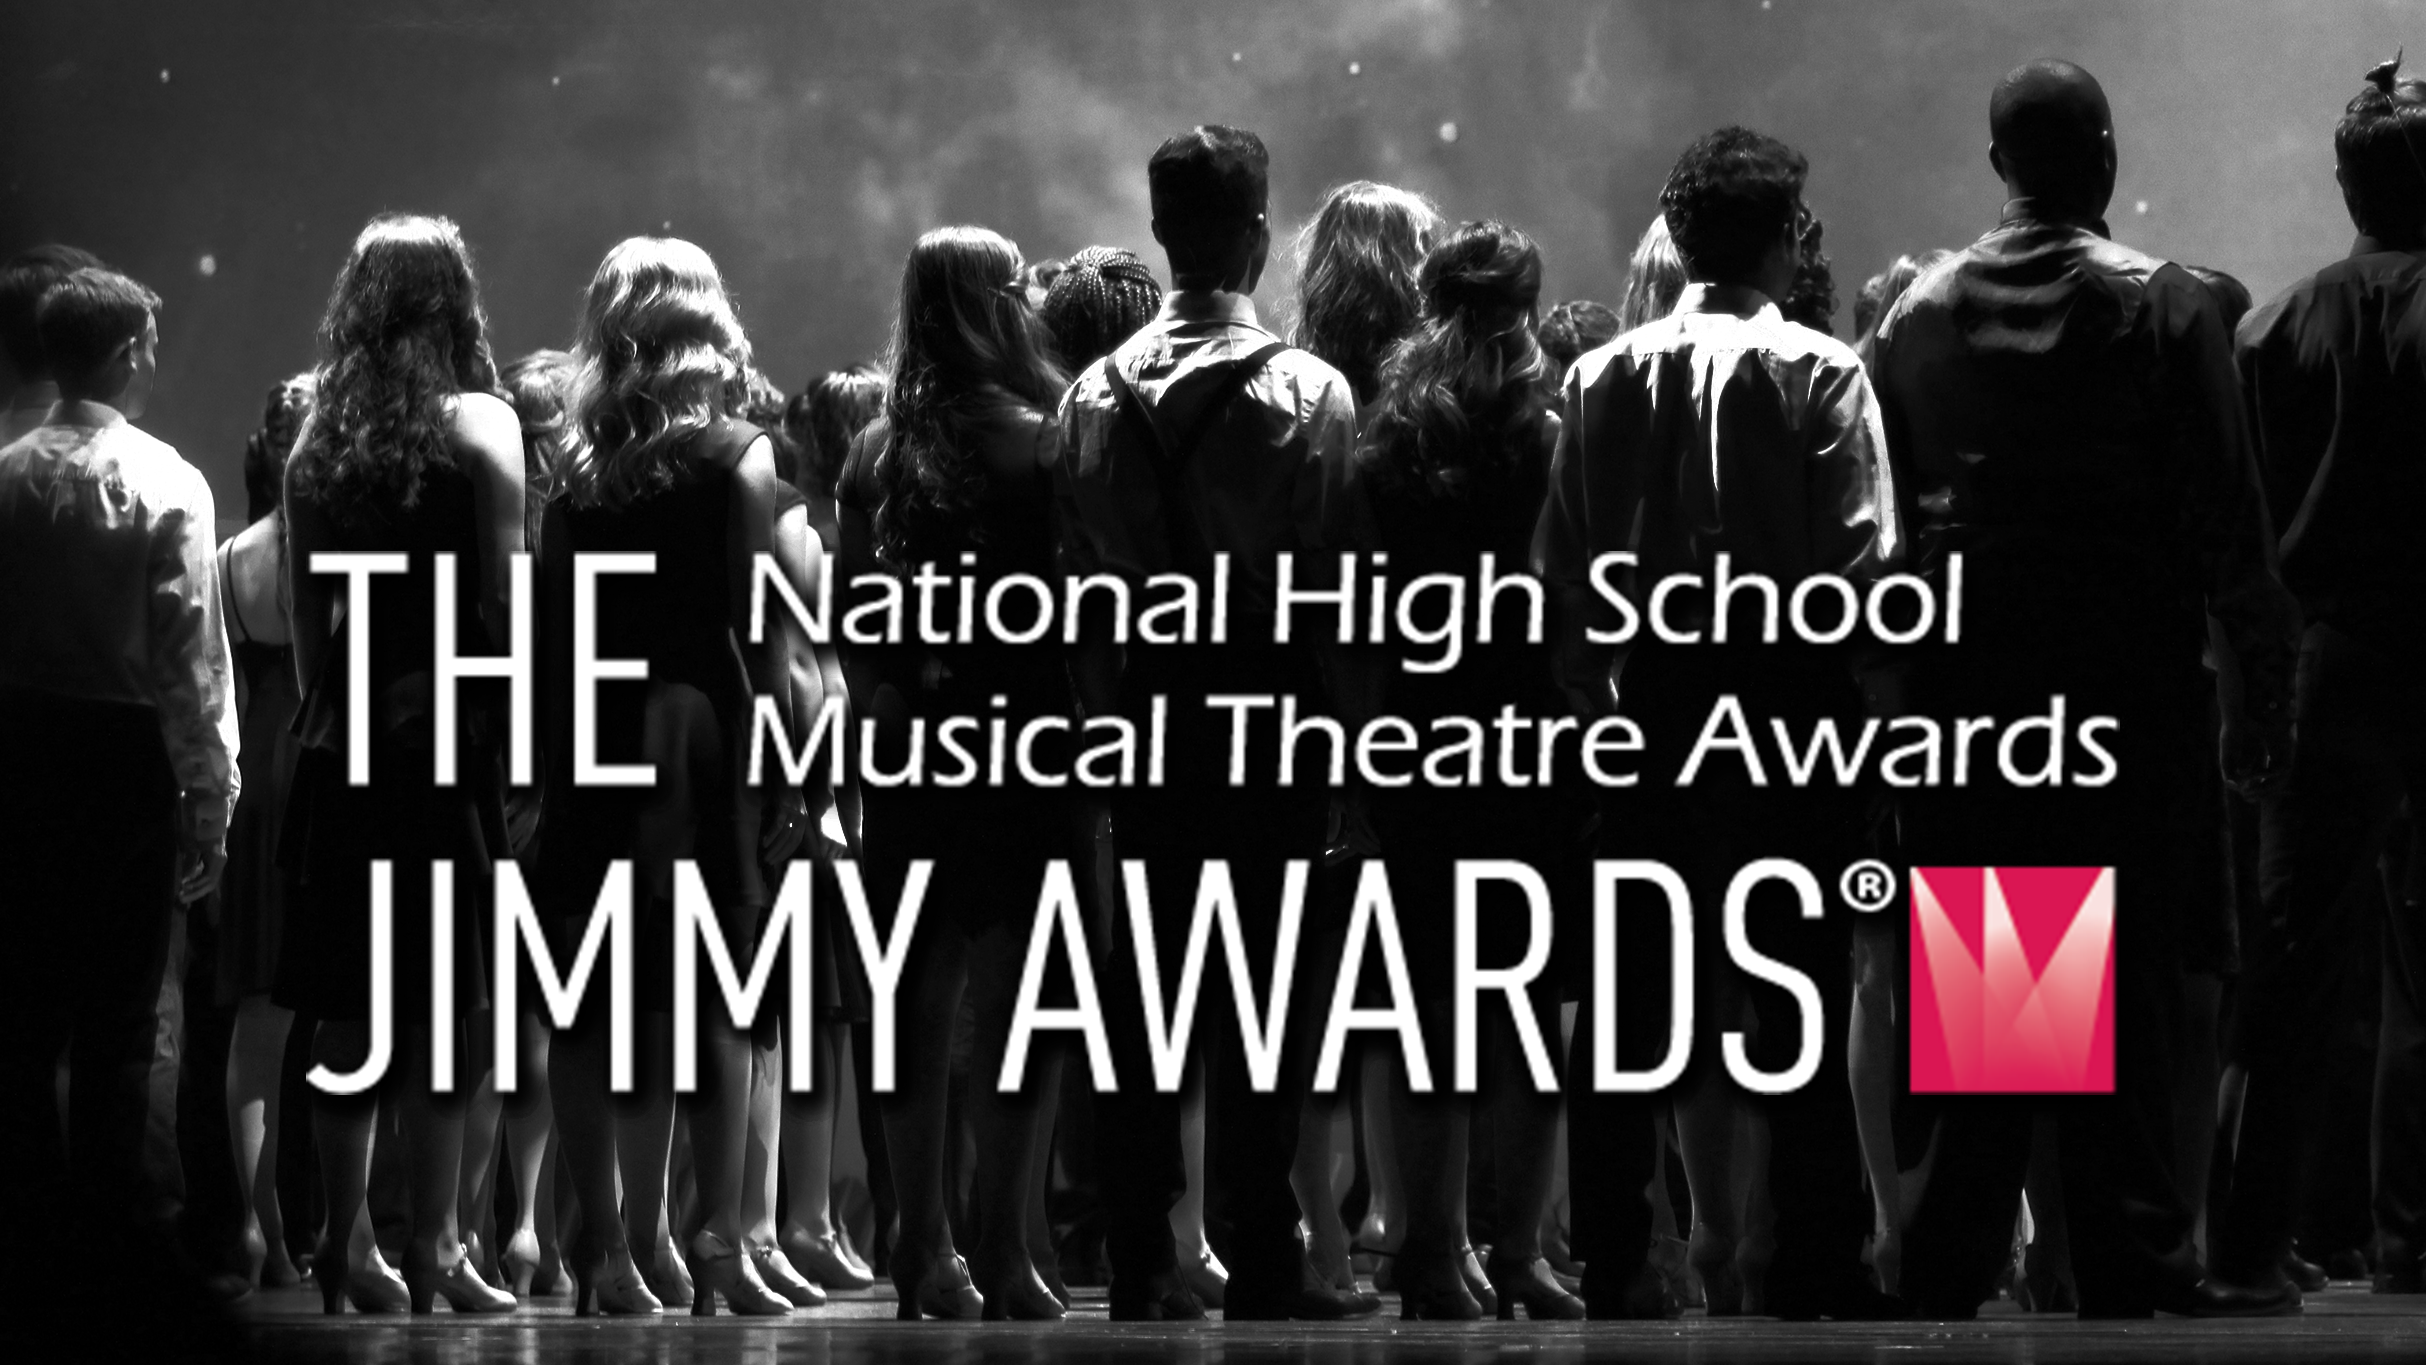 The Jimmy Awards (National High School Musical Theatre Awards)